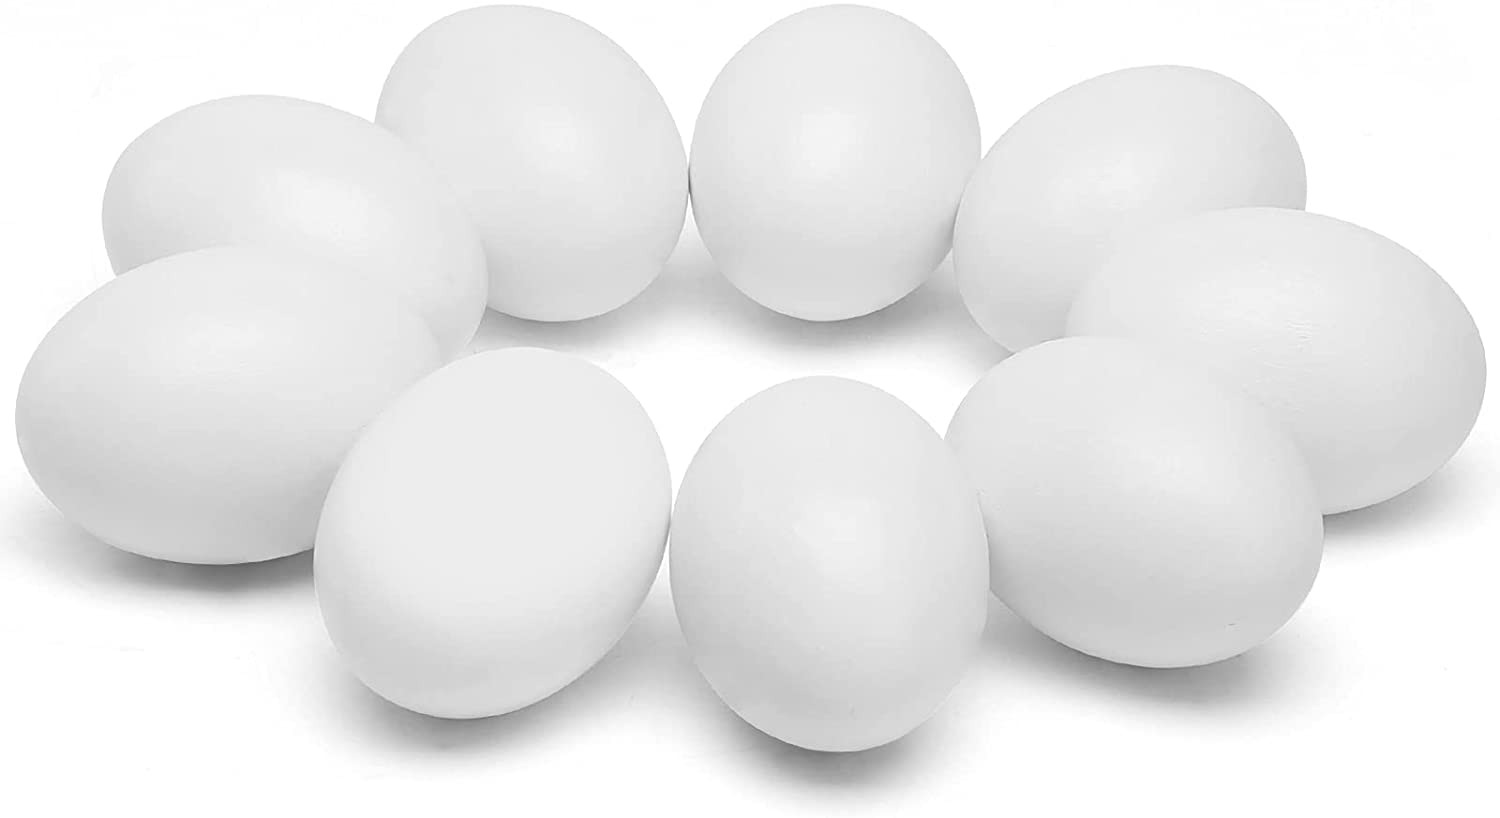 Set of 9 White Wooden Easter Eggs - High-Quality and Lifelike Decorative Wood Eg